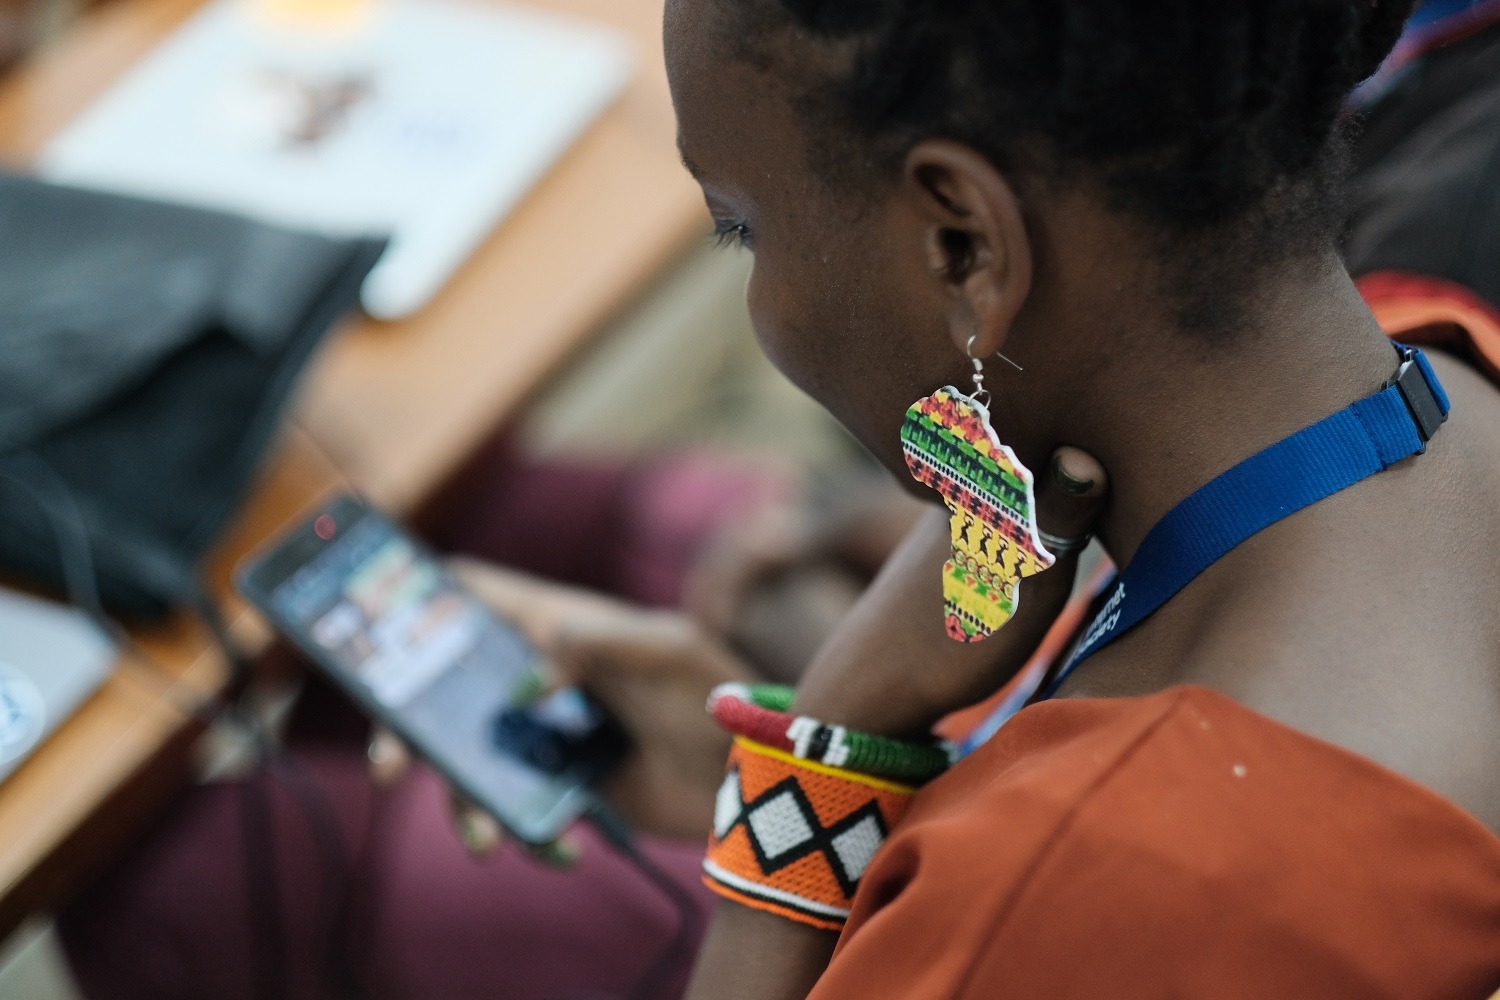 Africa earrings at the 4th annual Summit on Community Networks in Africa at the University of Dodoma, Tanzania on 31 October 2019.